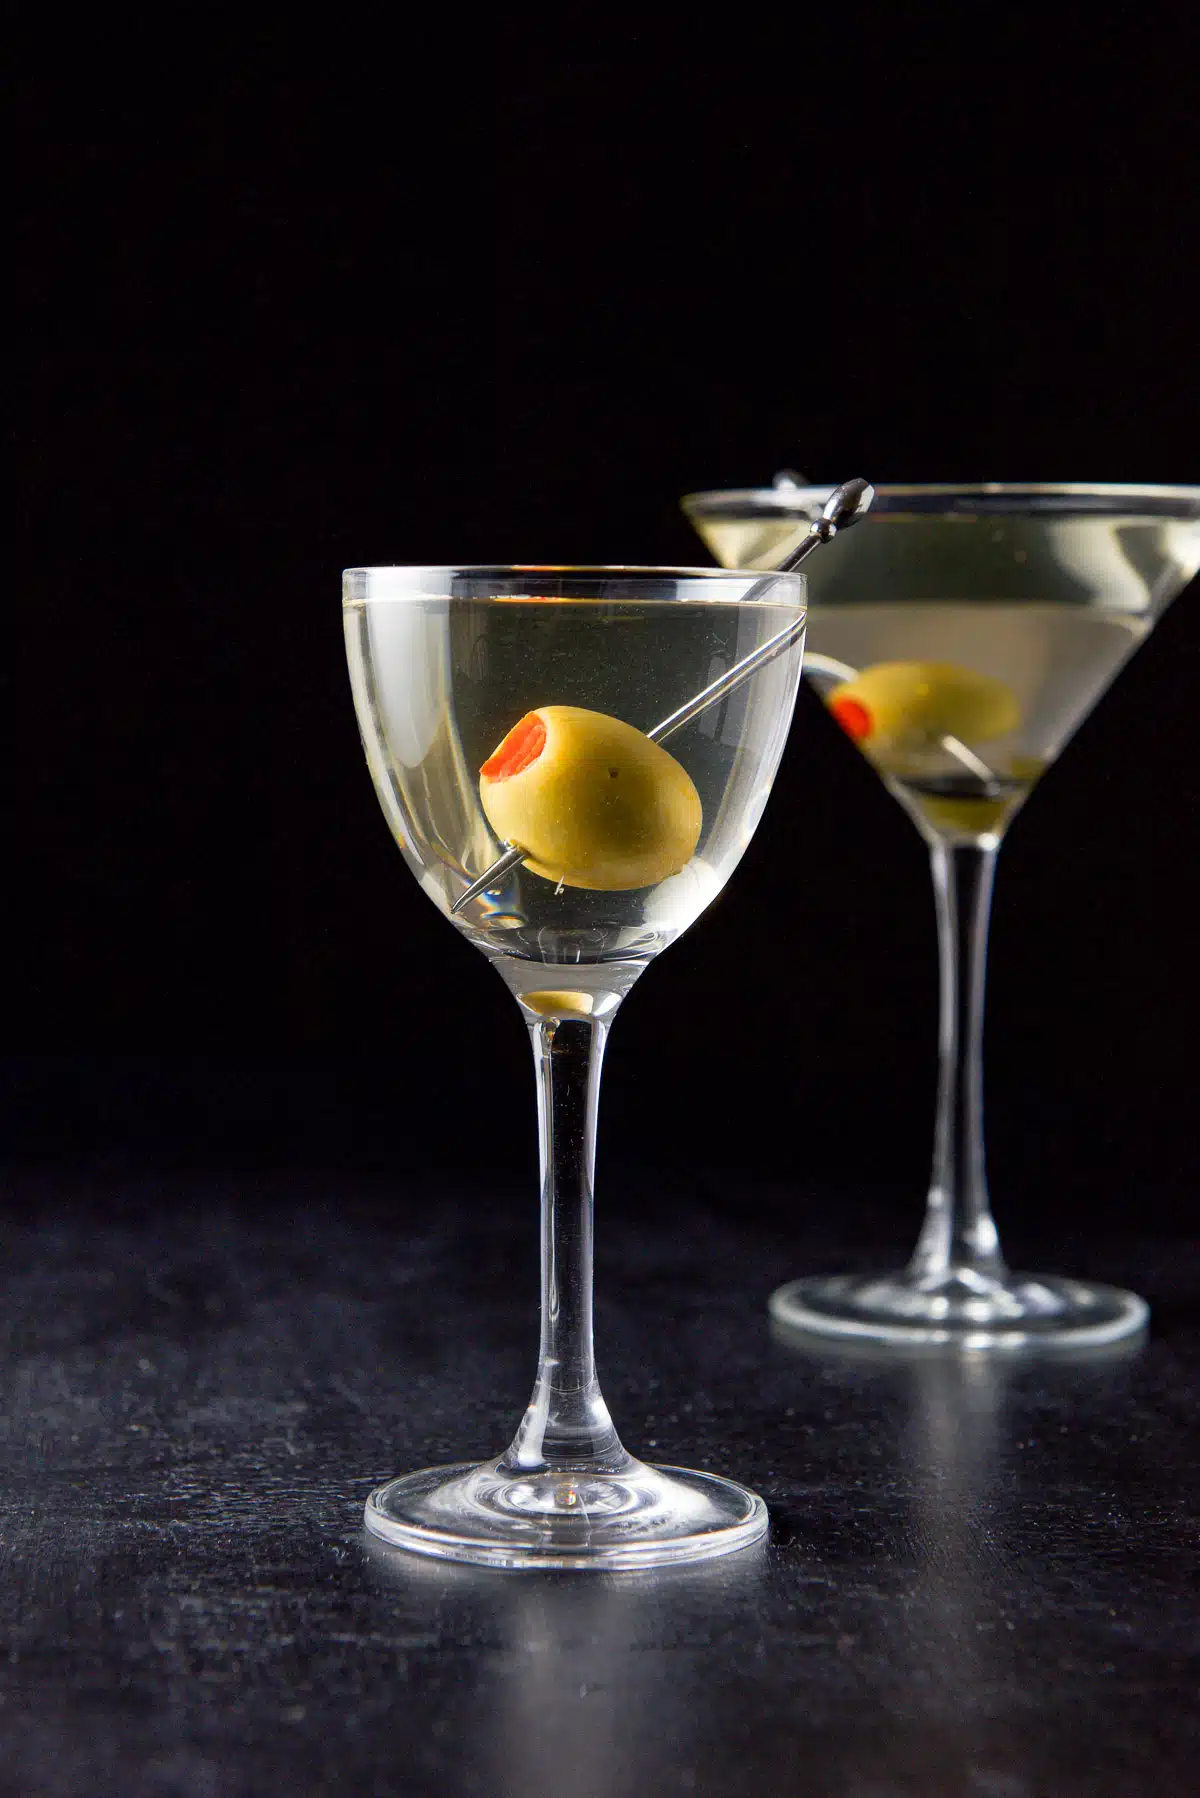 Vertical view of the smaller glass with the martini with a big olive in it. Regular martini glass in the background